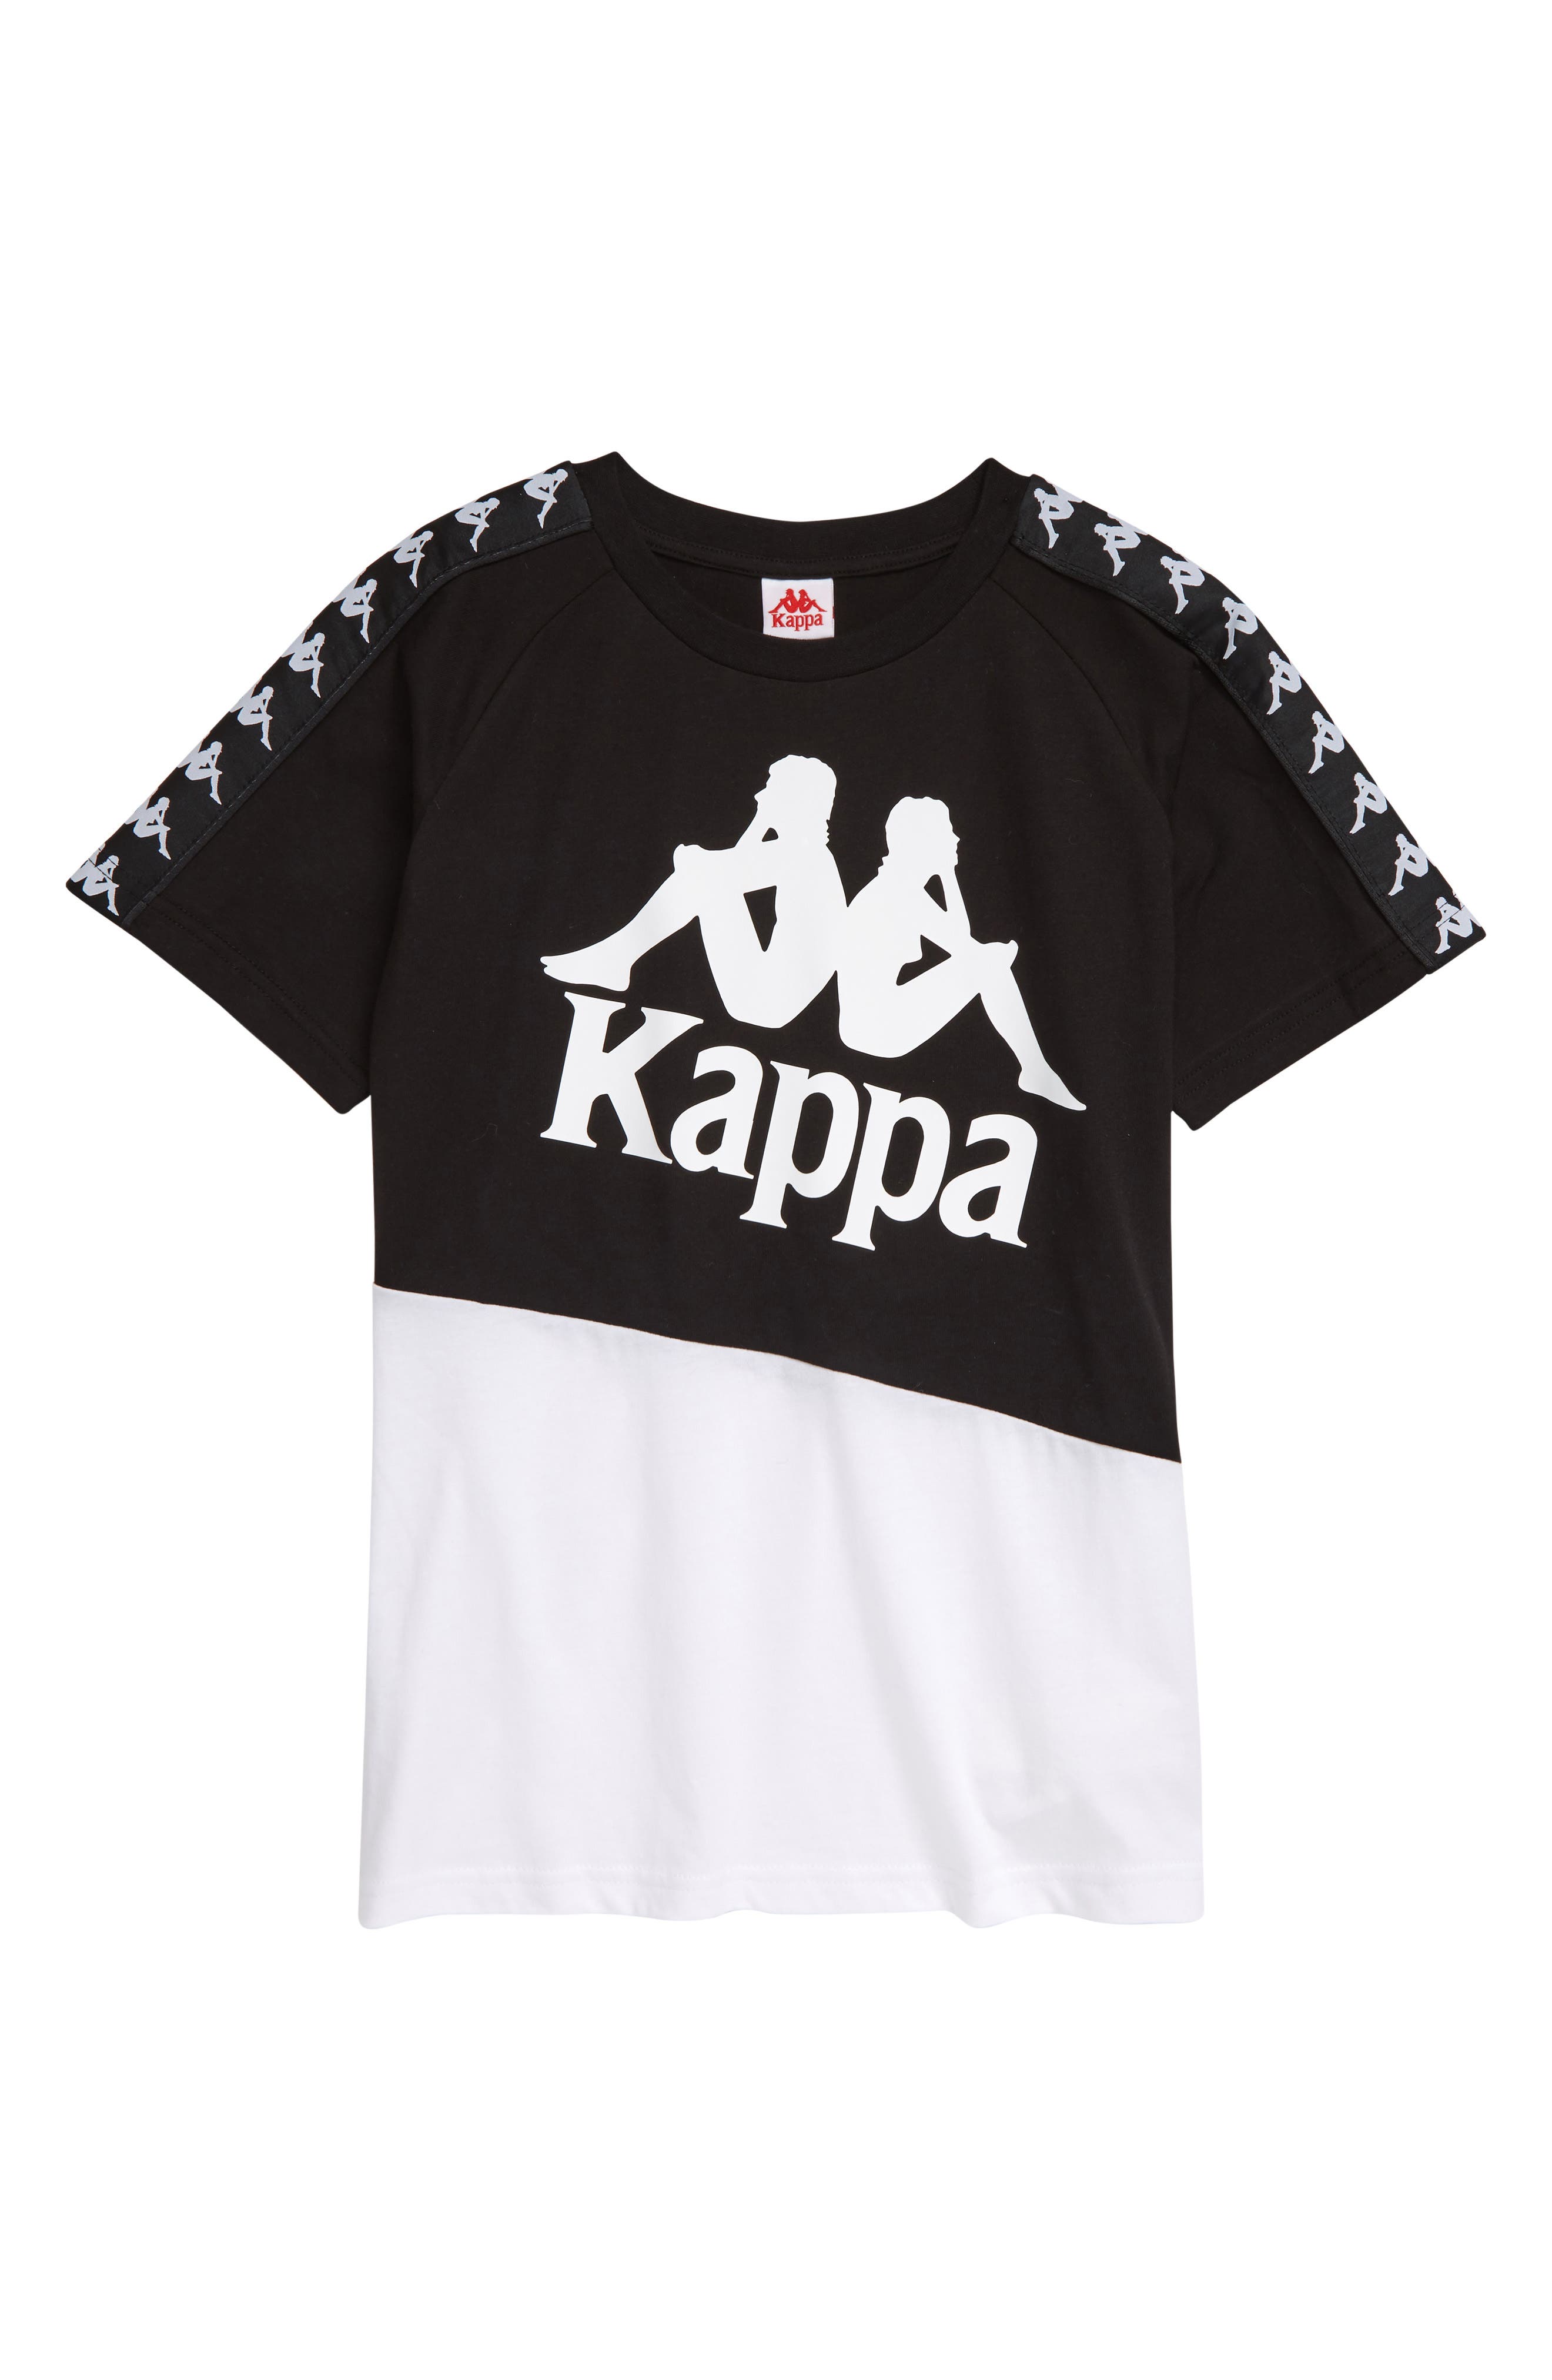 Kappa Clothing Online UP 62% OFF